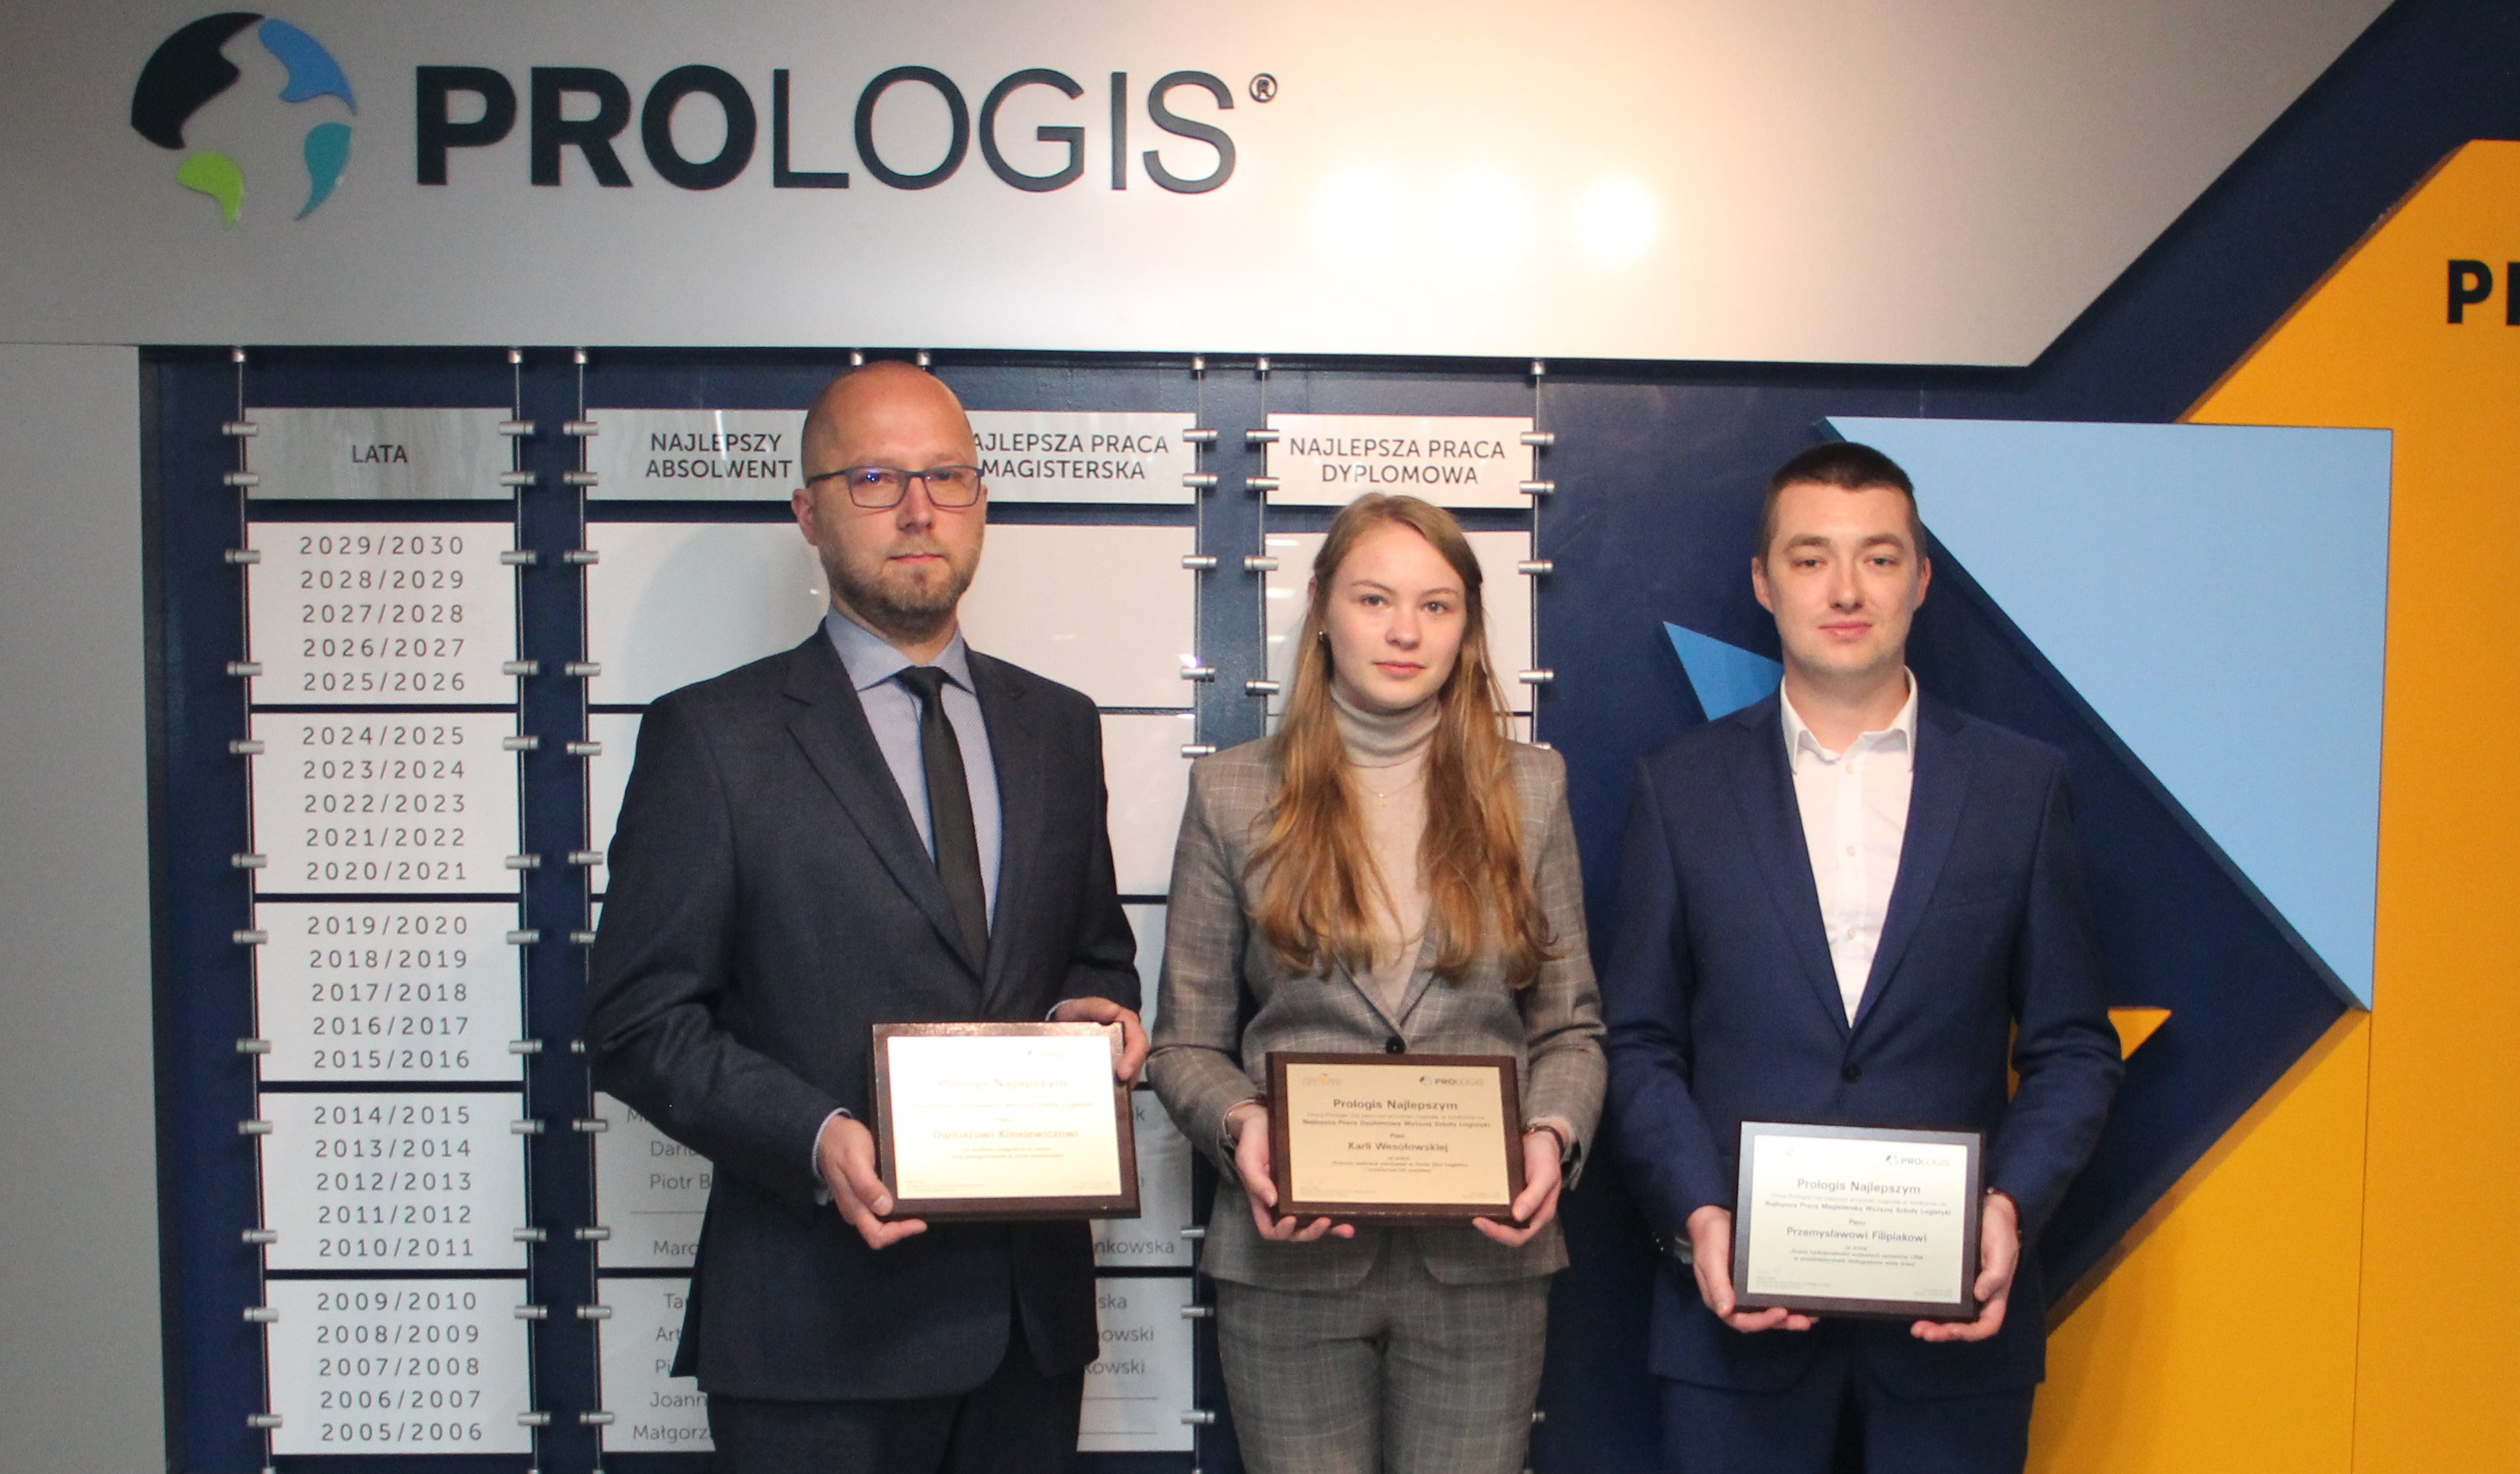 Prologis "For the Best" Awards 2019